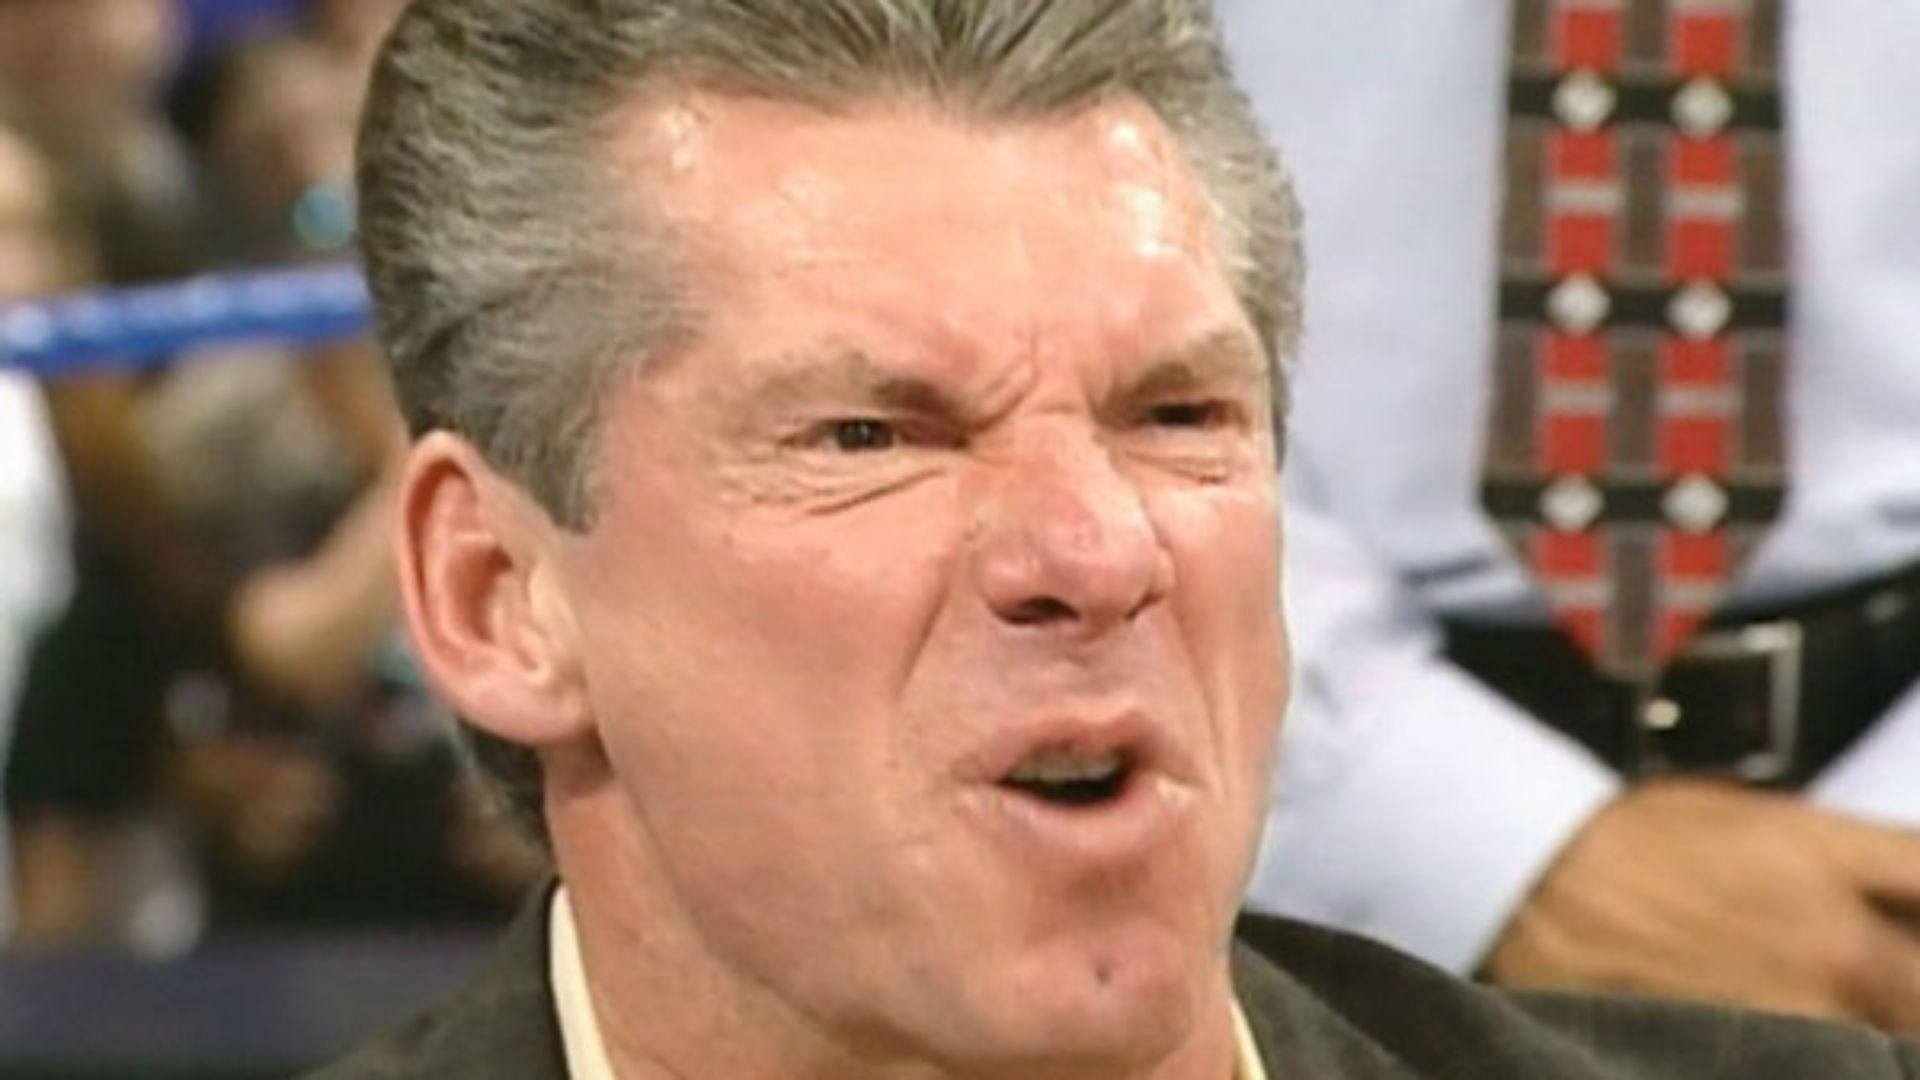 Vince McMahon is the former chairman of WWE